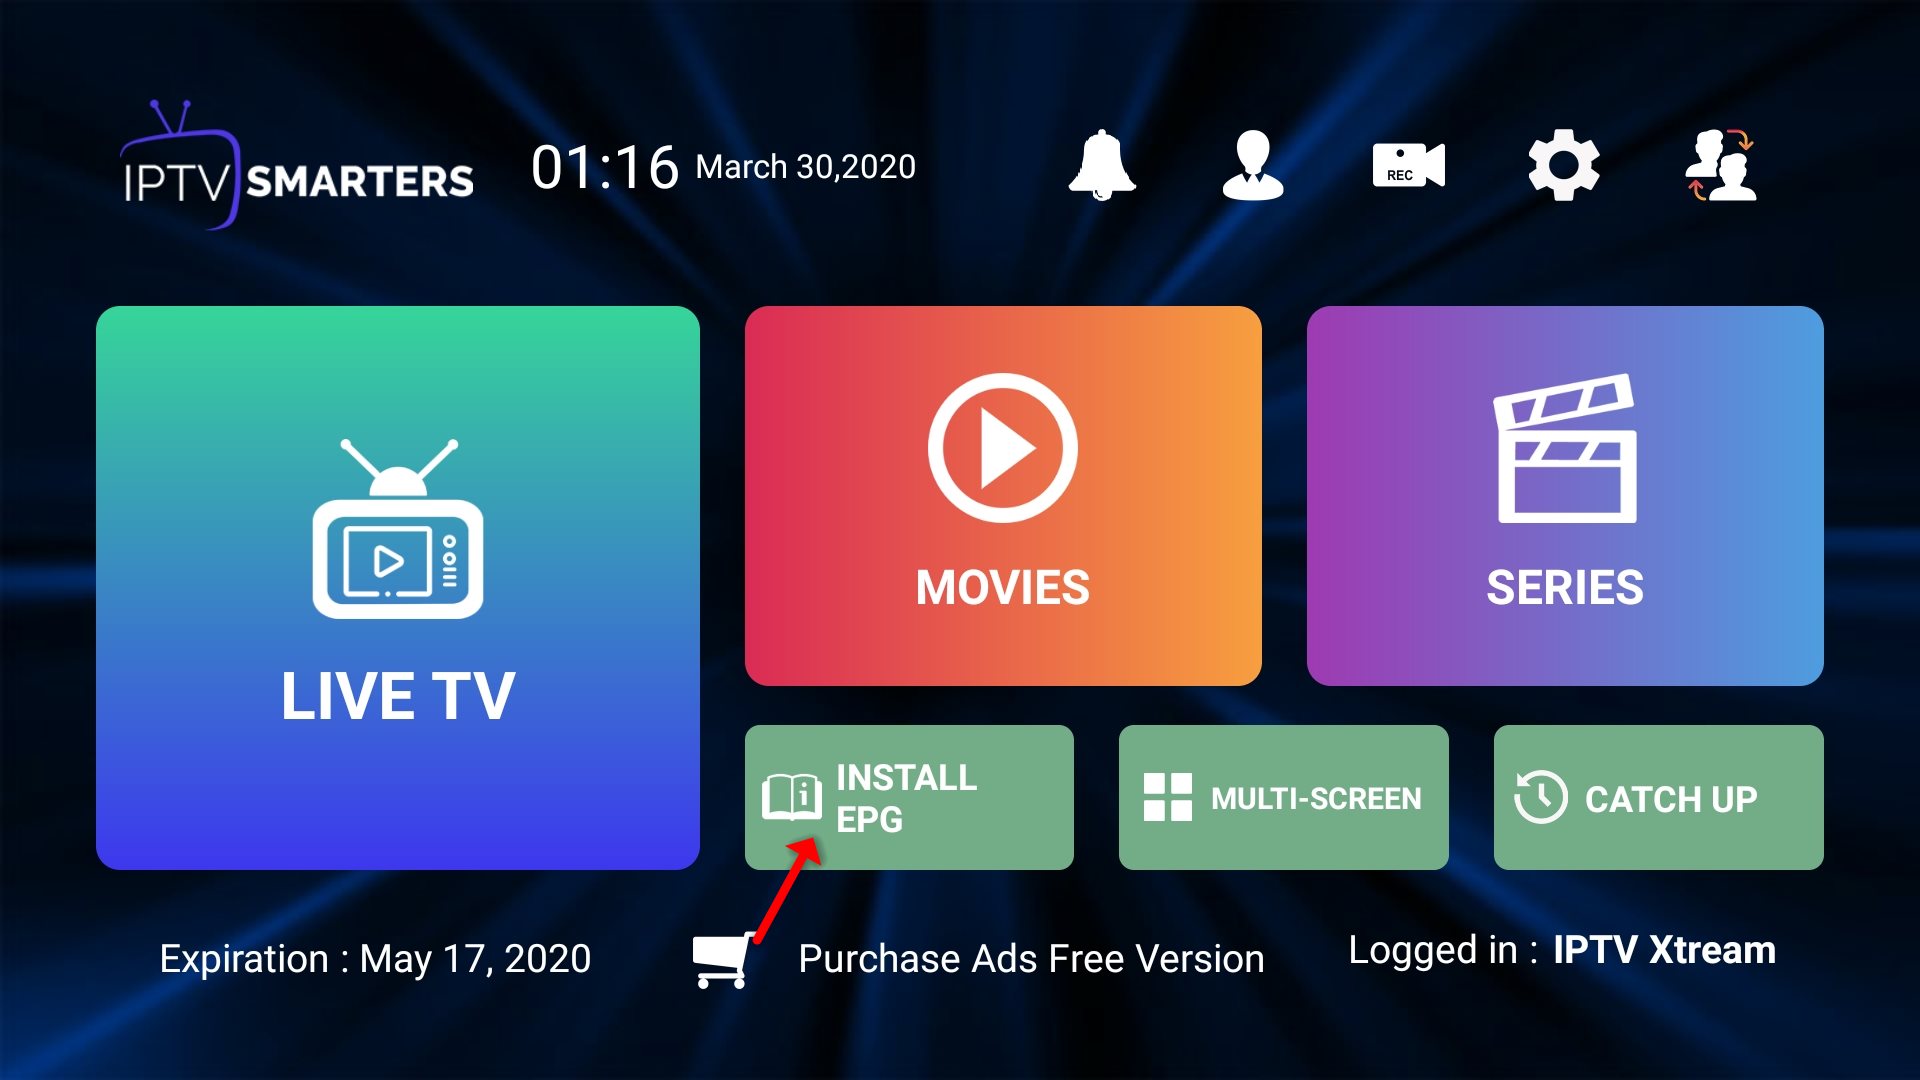 Install IPTV on your Android Smartphone, BOX, & TV (IPTV Smarters